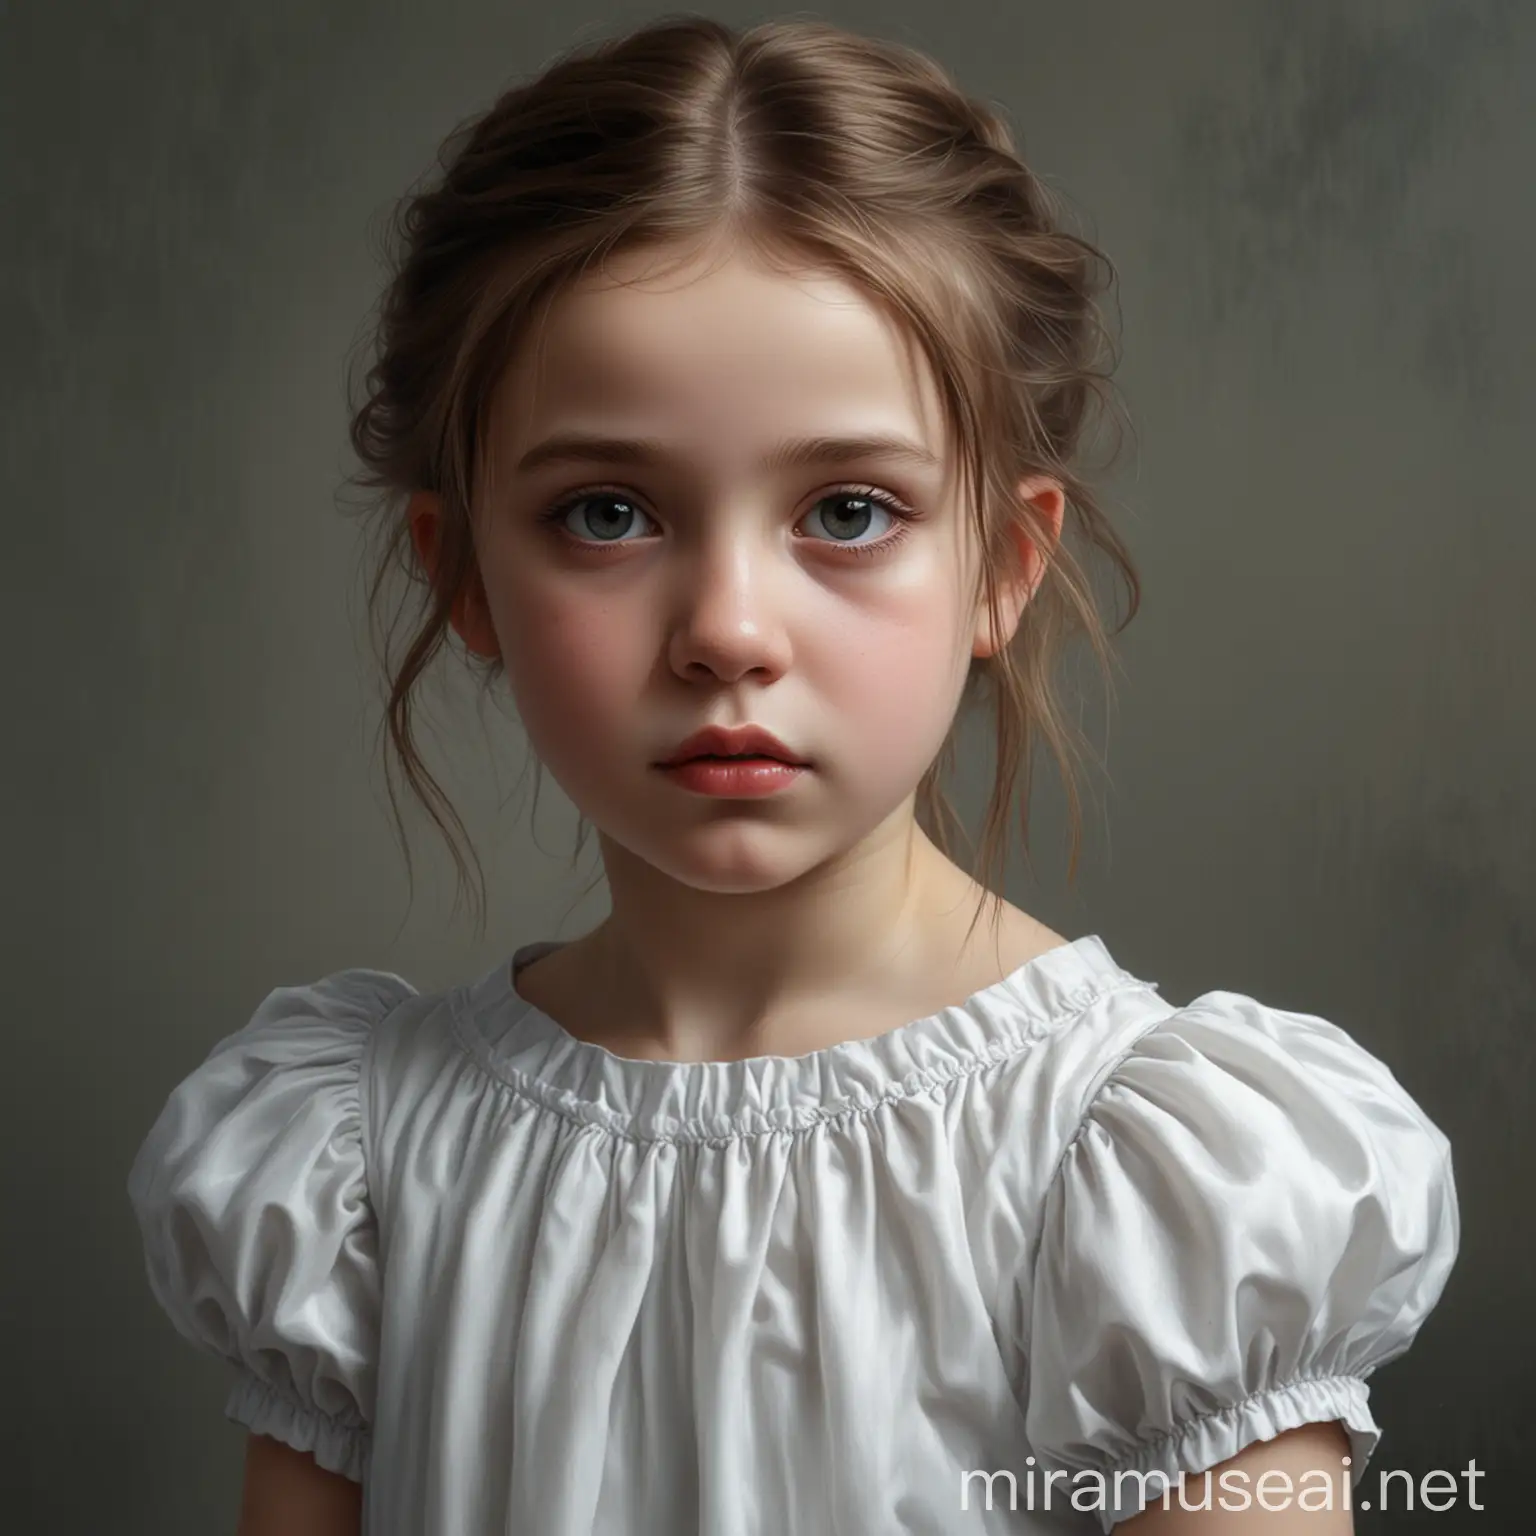 Hyper Realistic Portrait of a Young Girl in a White Dress